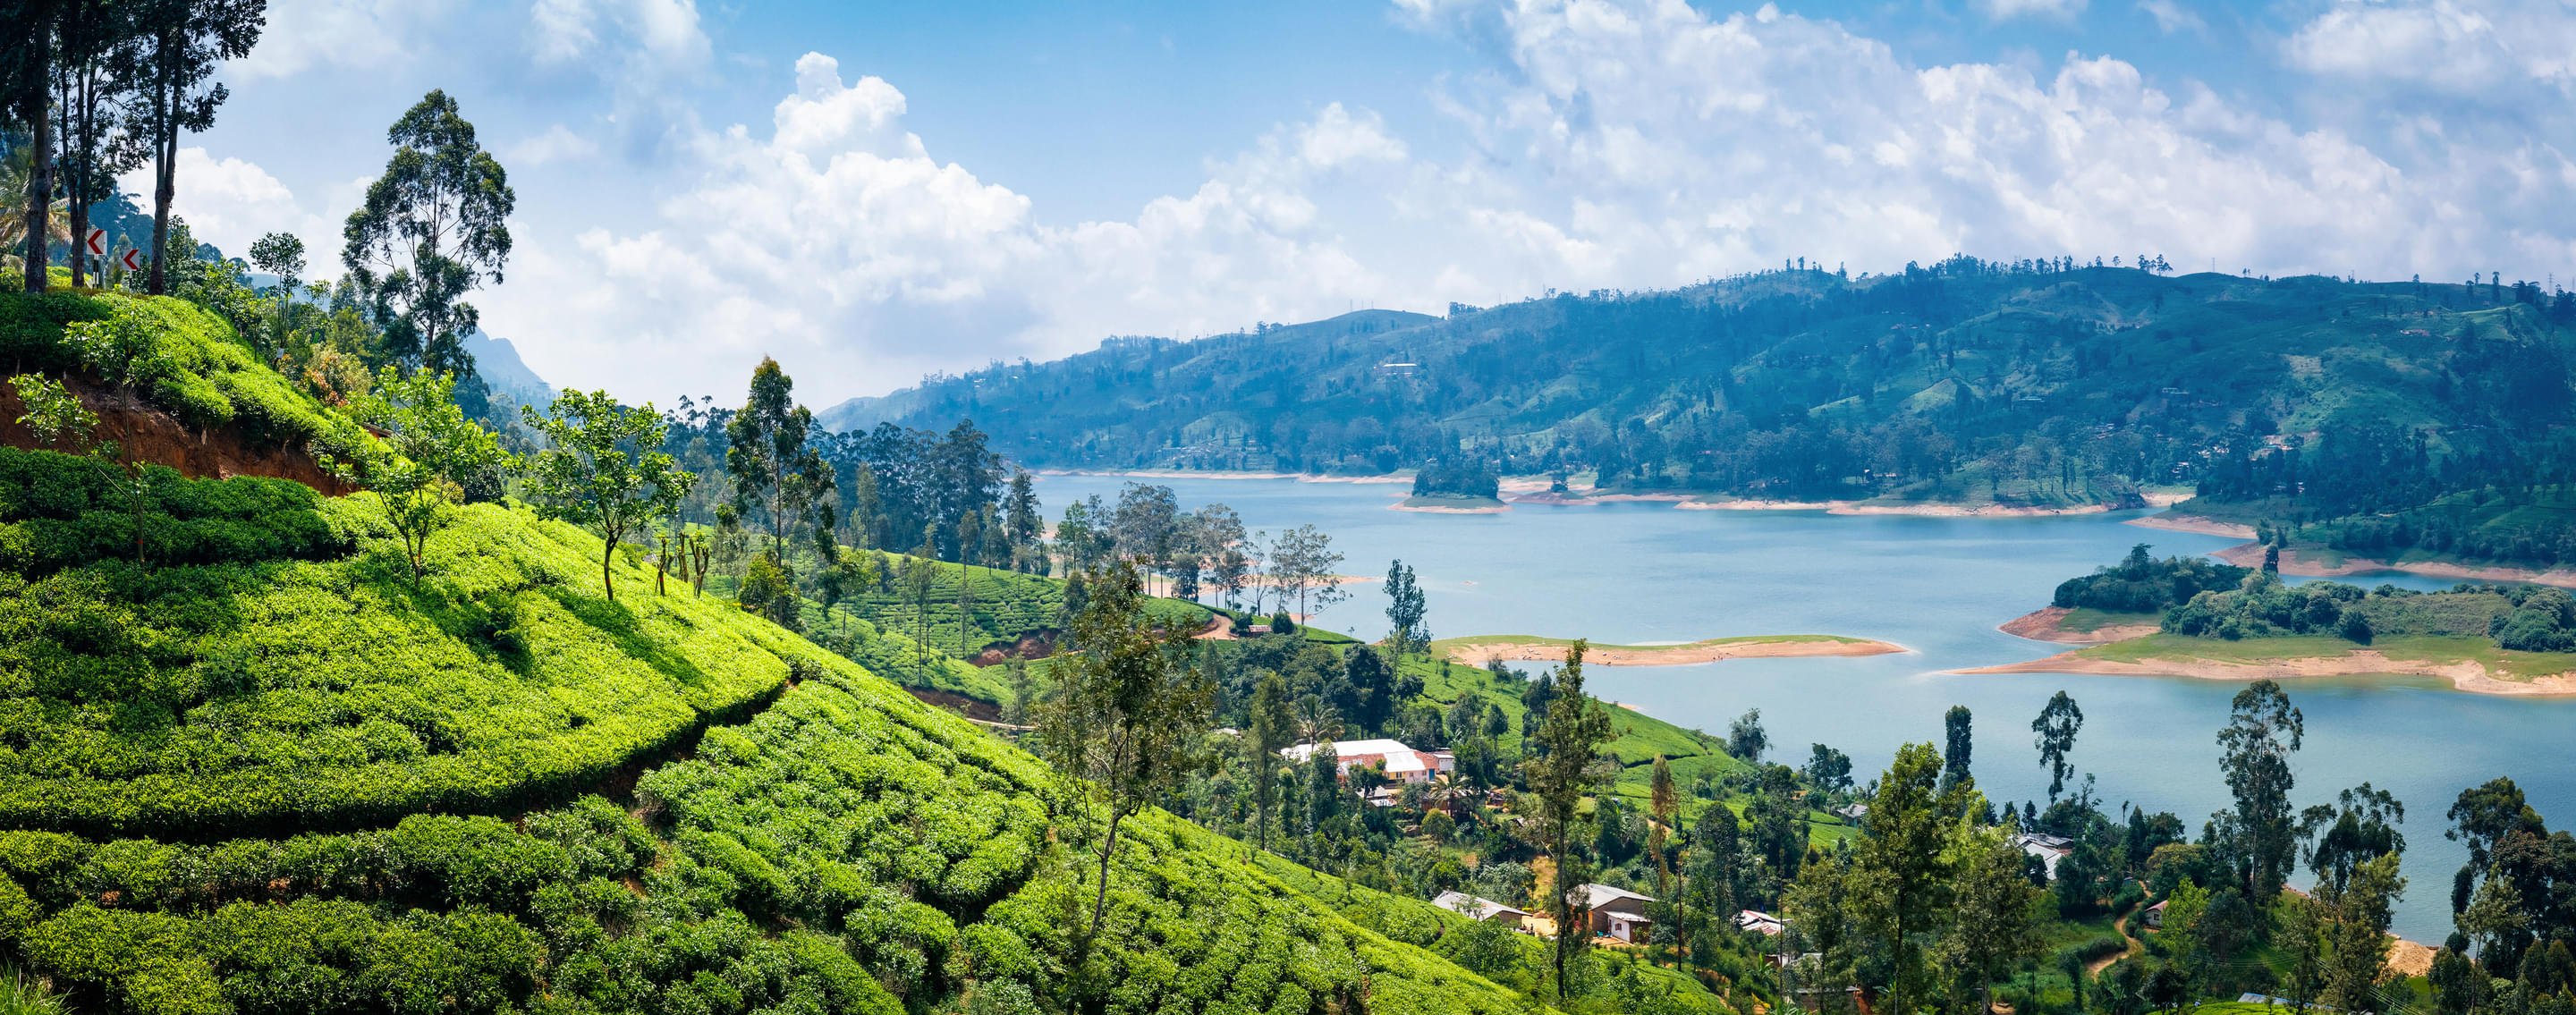 Kandy Packages from Goa | Get Upto 50% Off